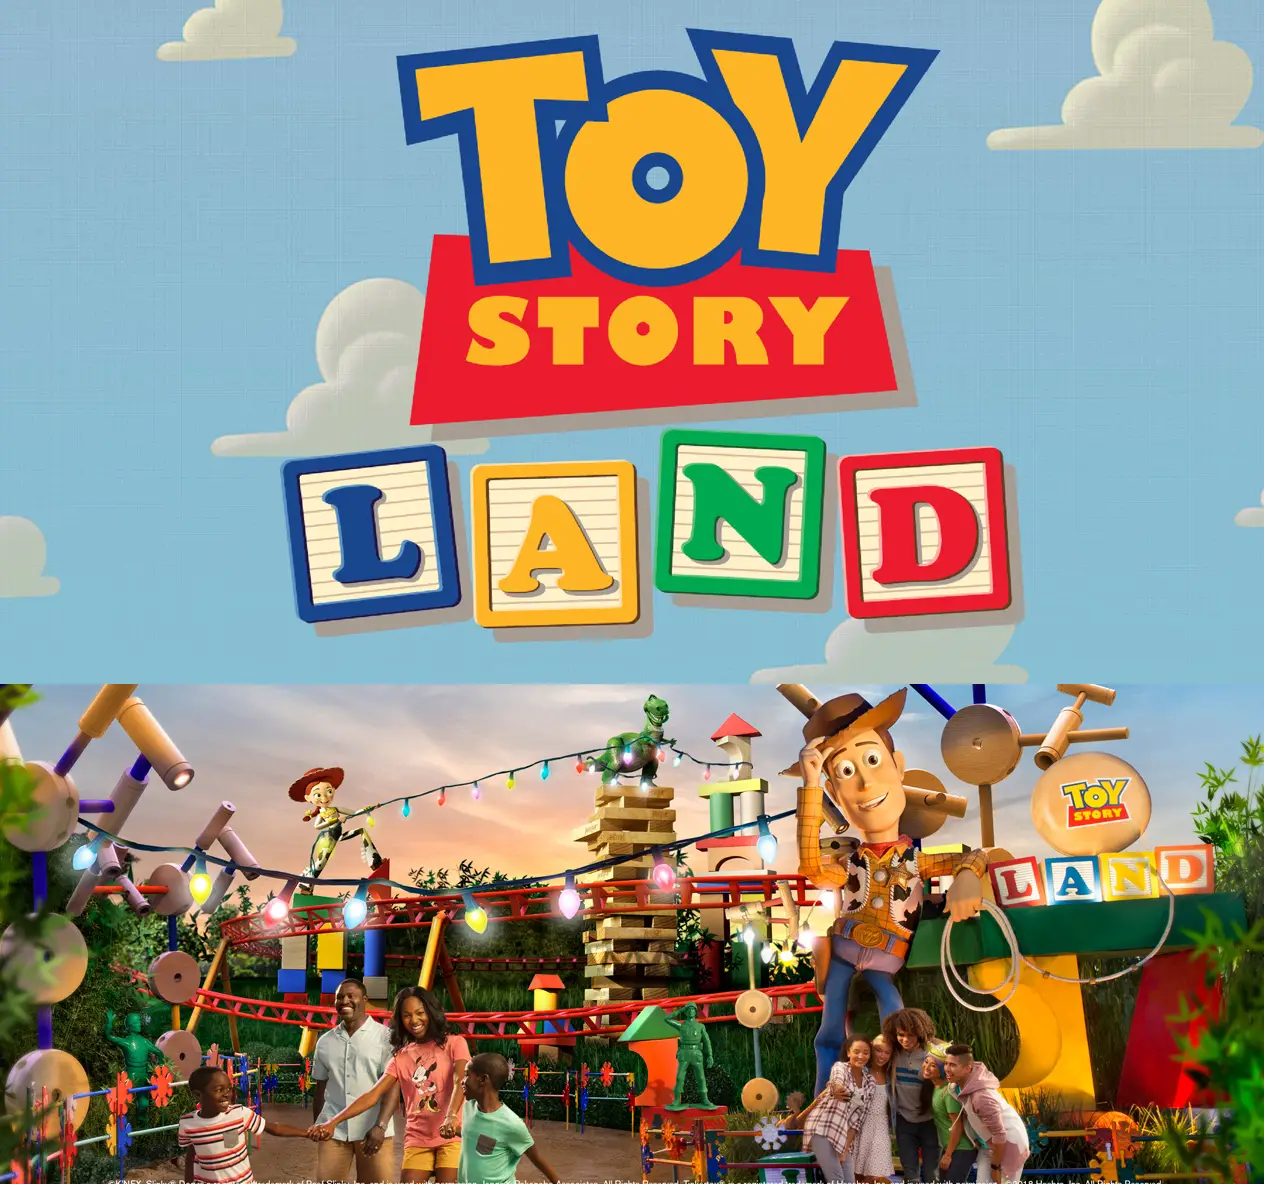 Want to be among the first to visit Toy Story Land? BoxLunch is giving you a chance to win a 4-night/5-day Walt Disney World Resort vacation for four to play big at the brand-new Toy Story Land!